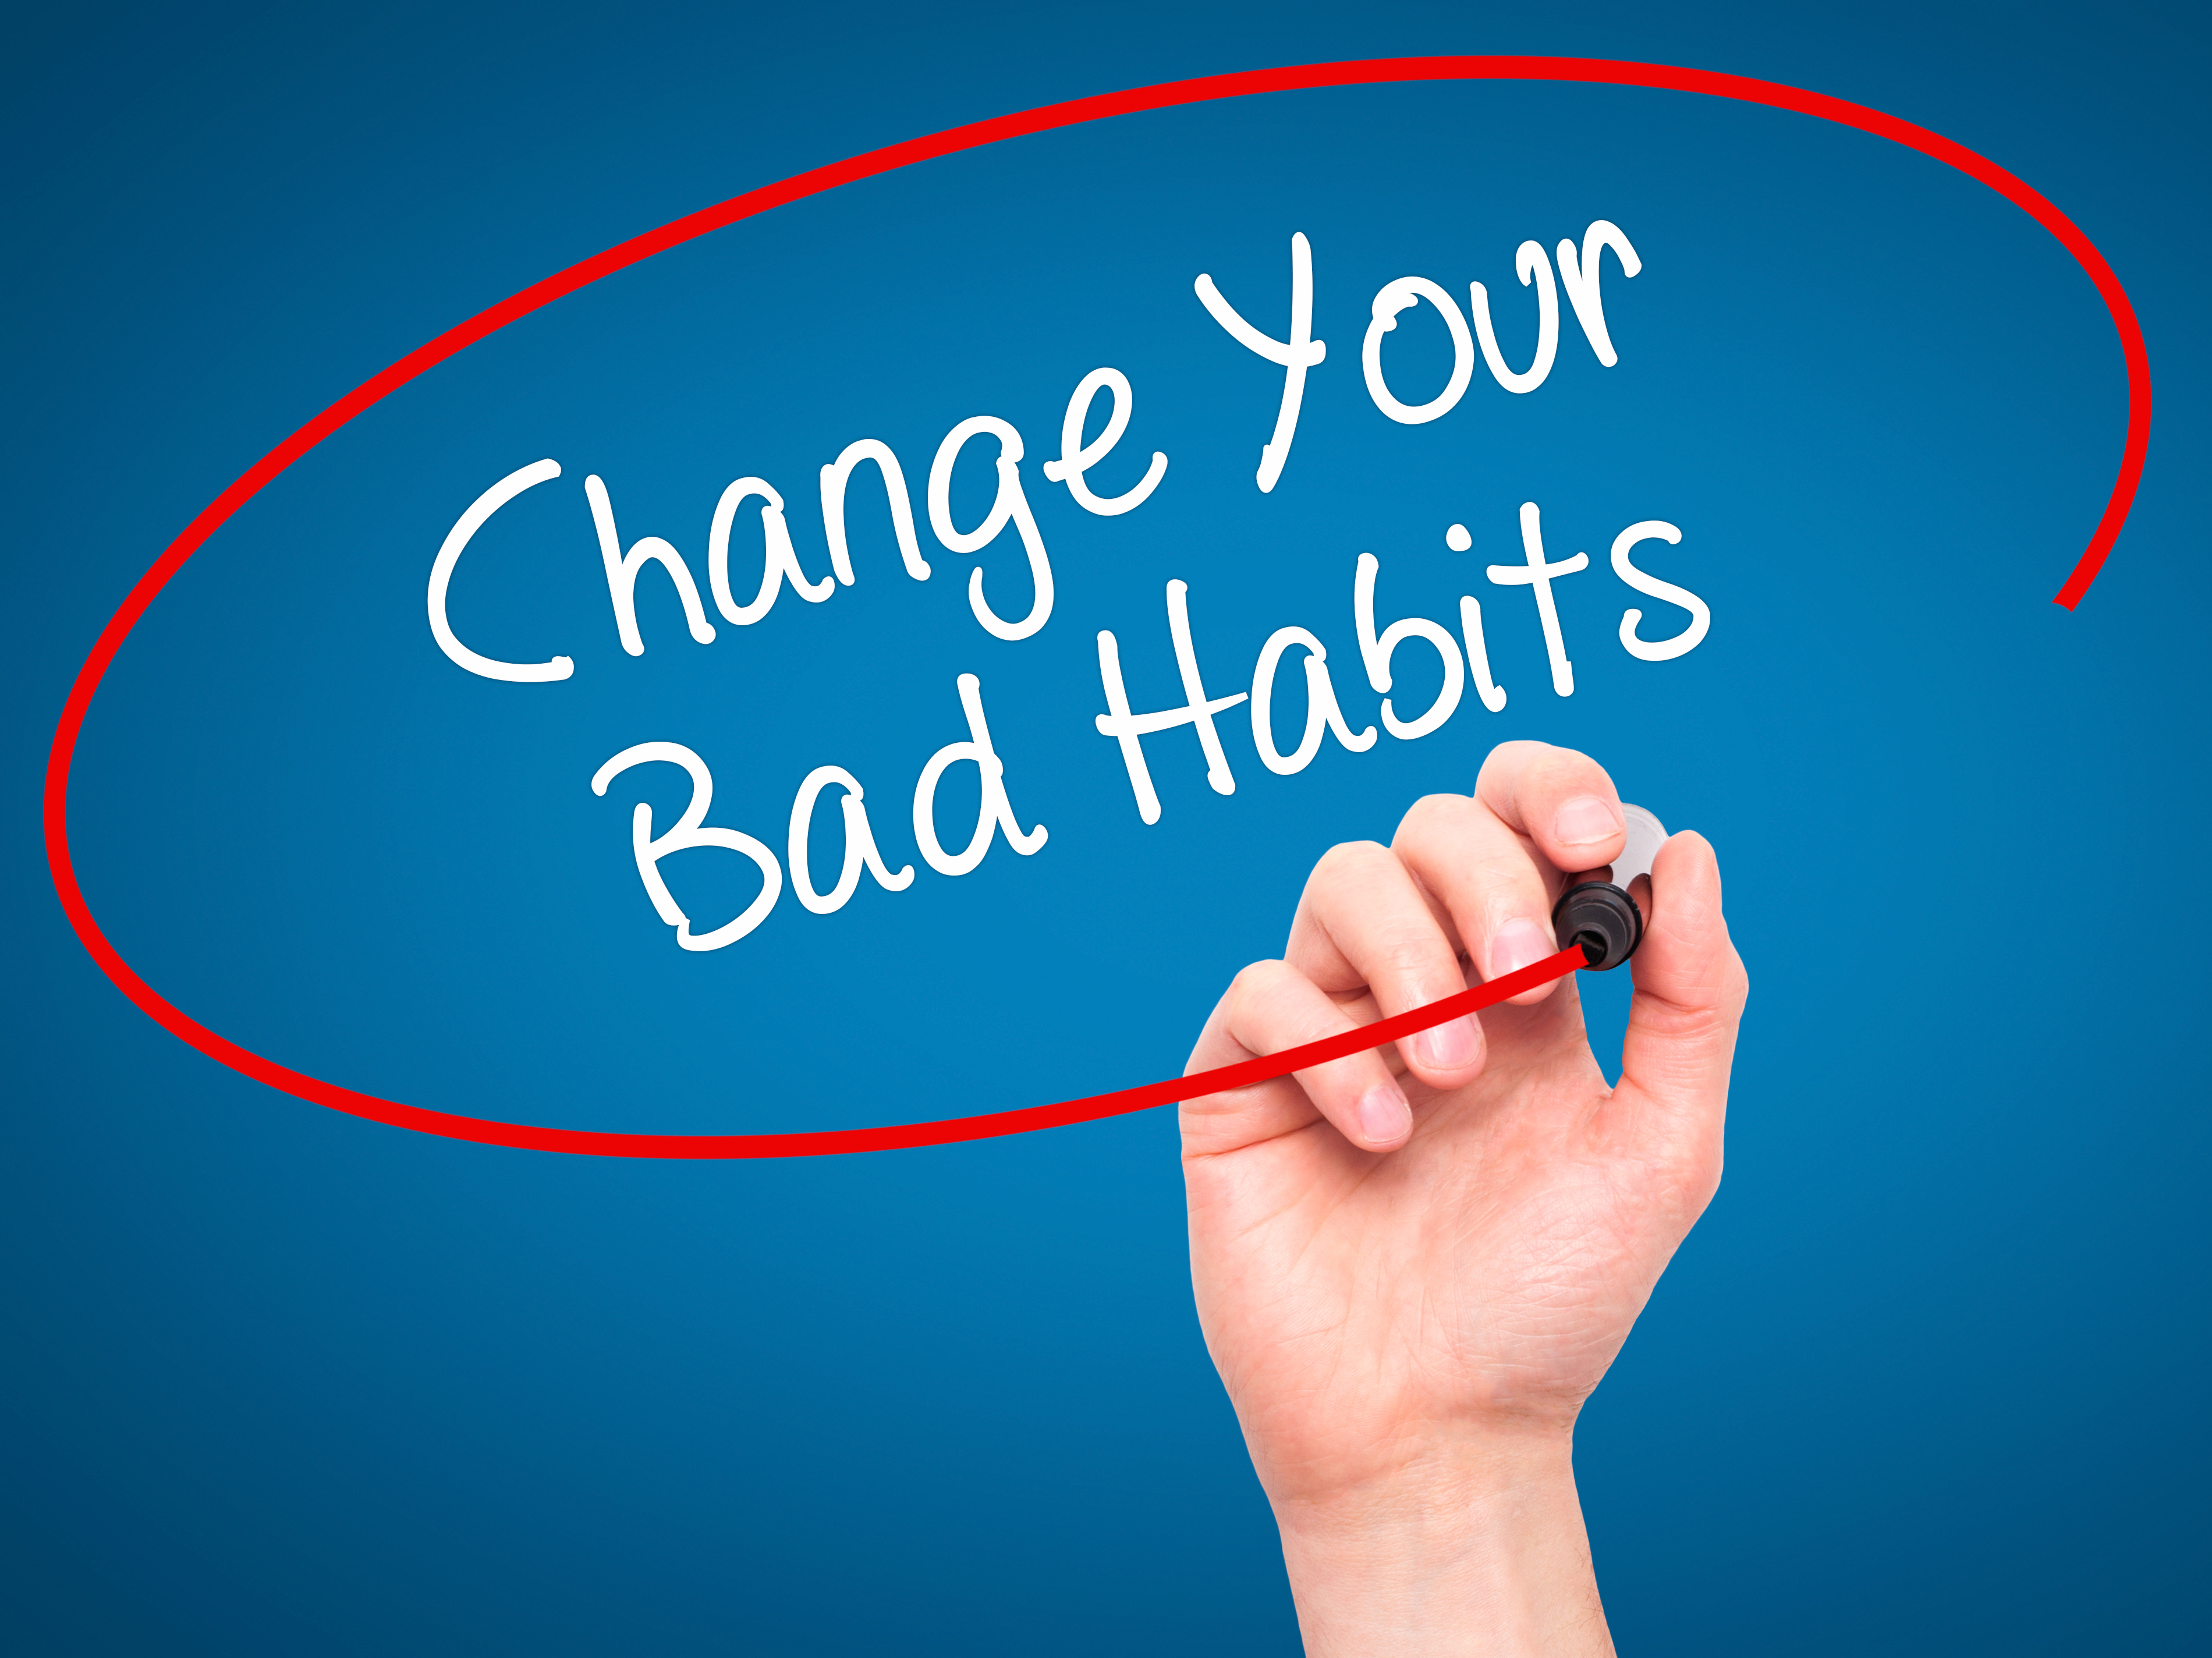 Ten bad habits for small business owners to overcome